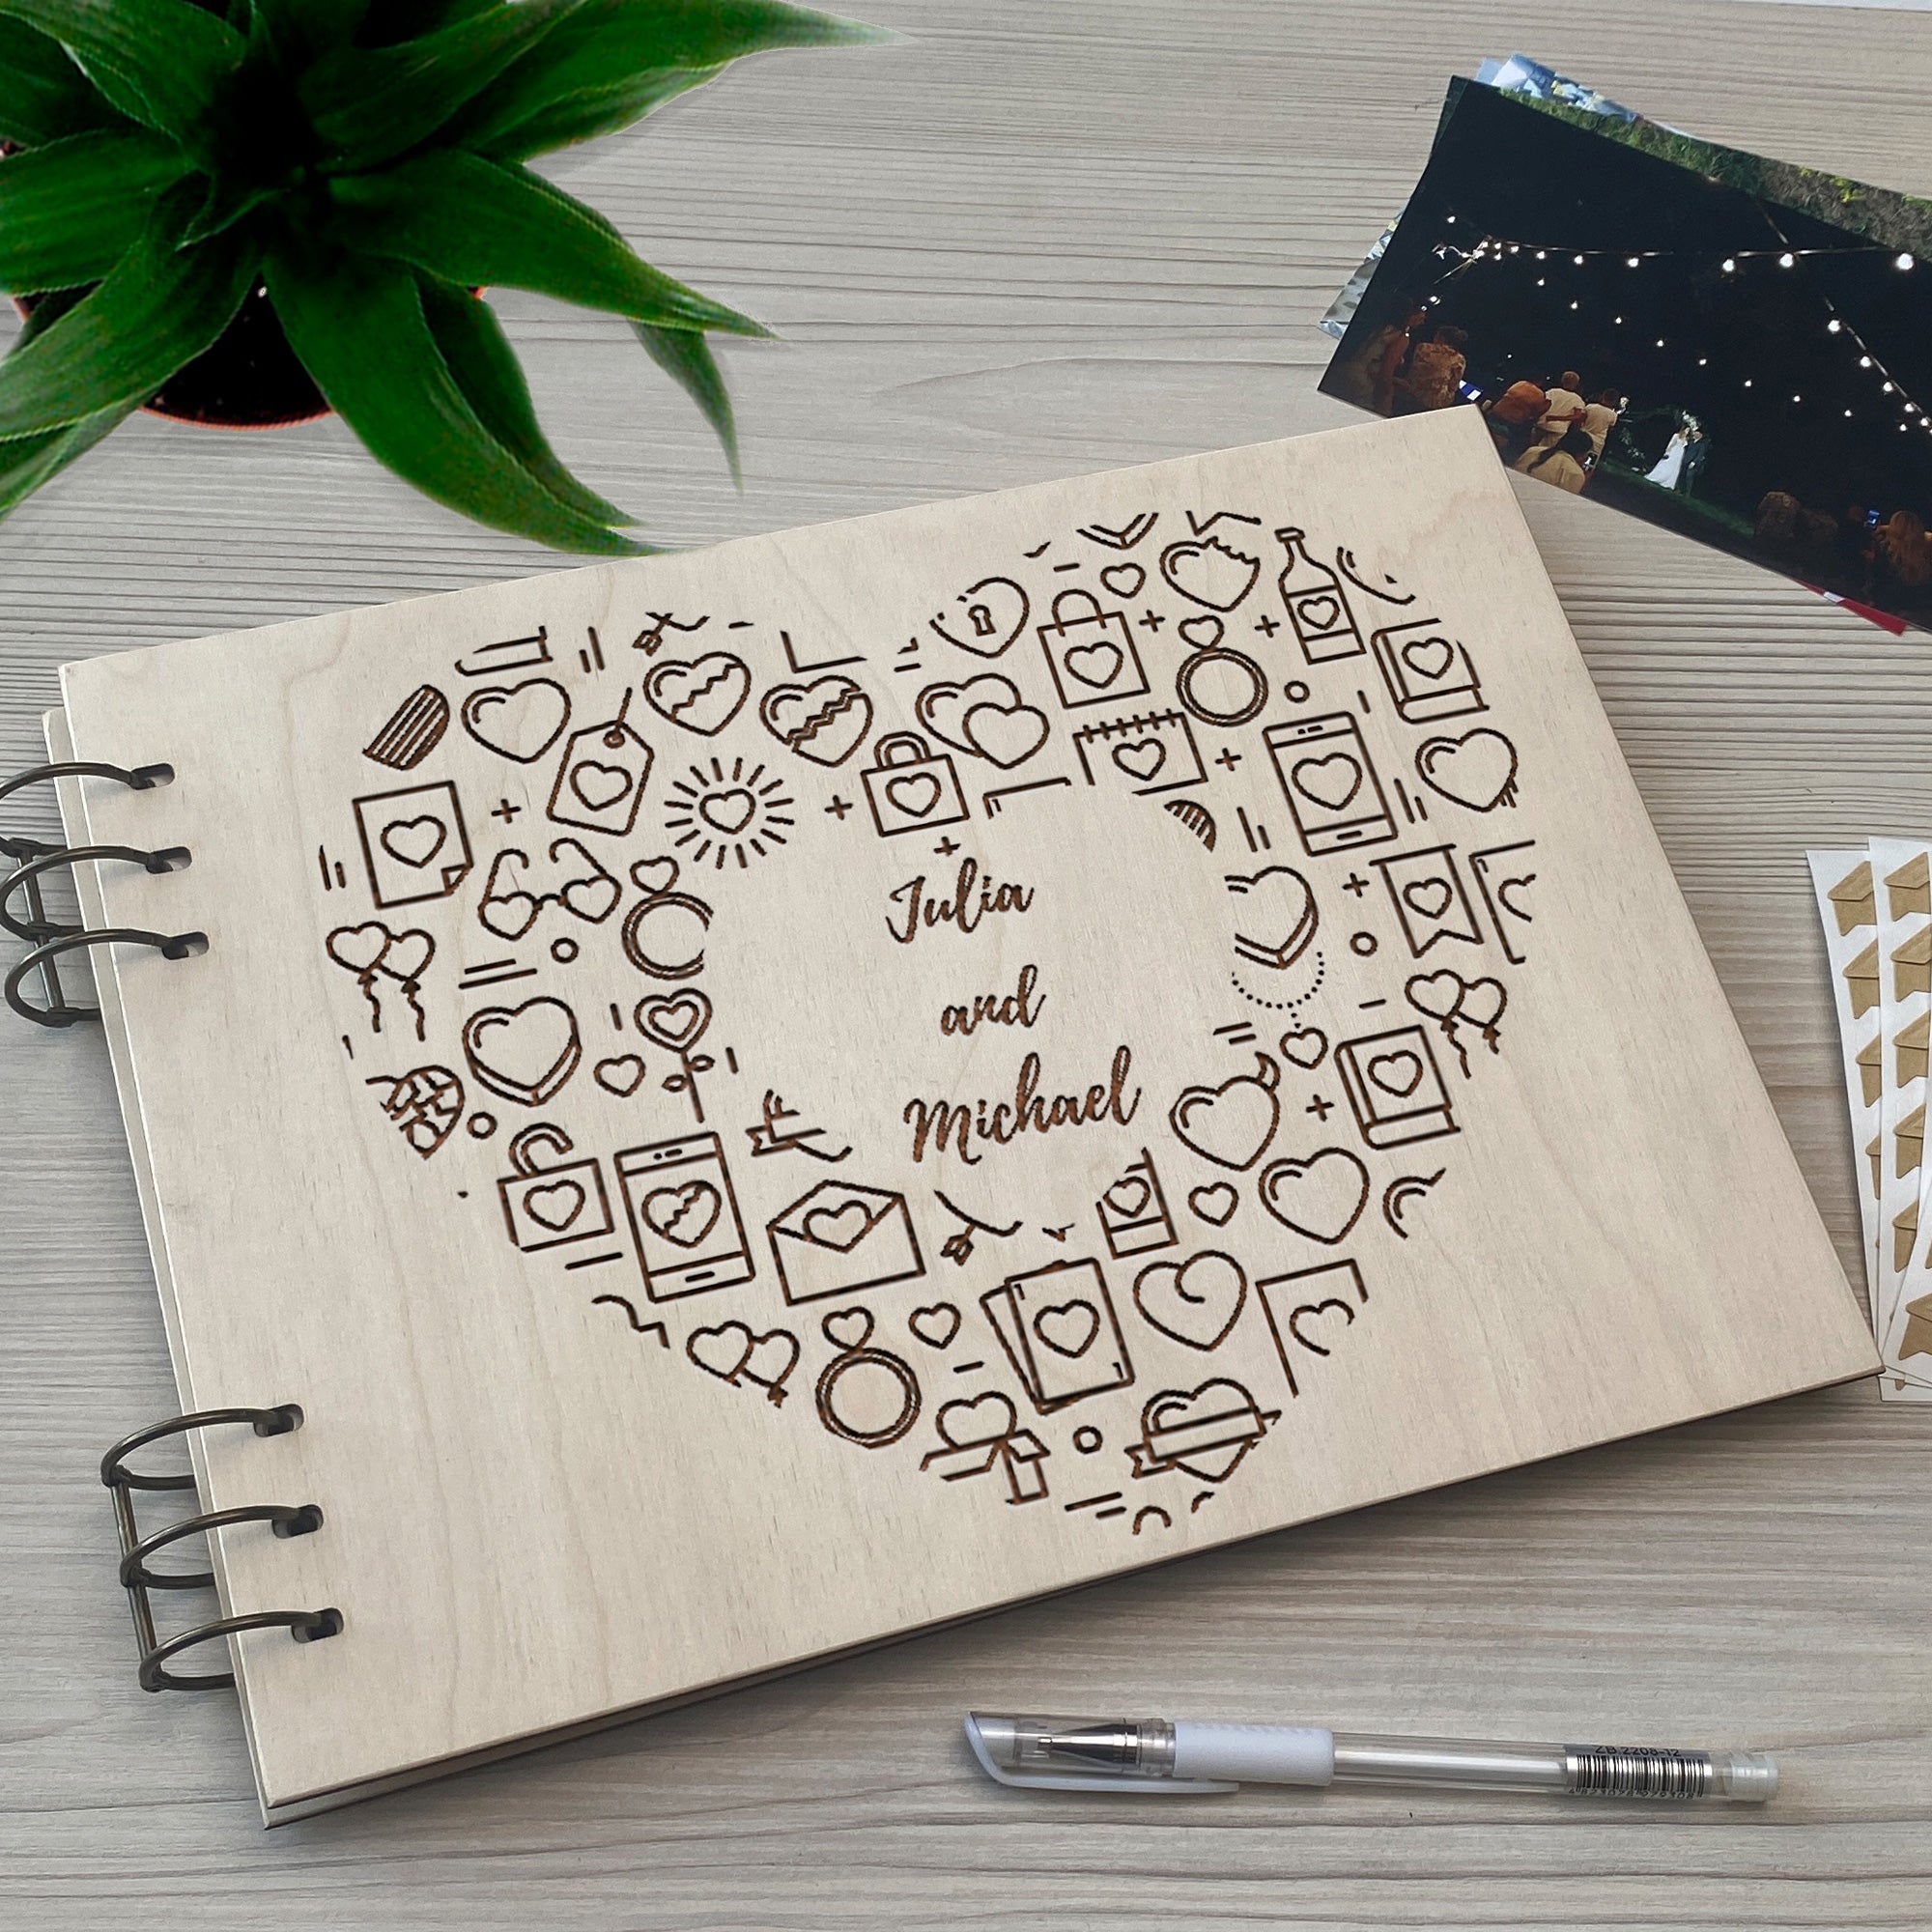 Personalized photo album cover and Hearts engraving